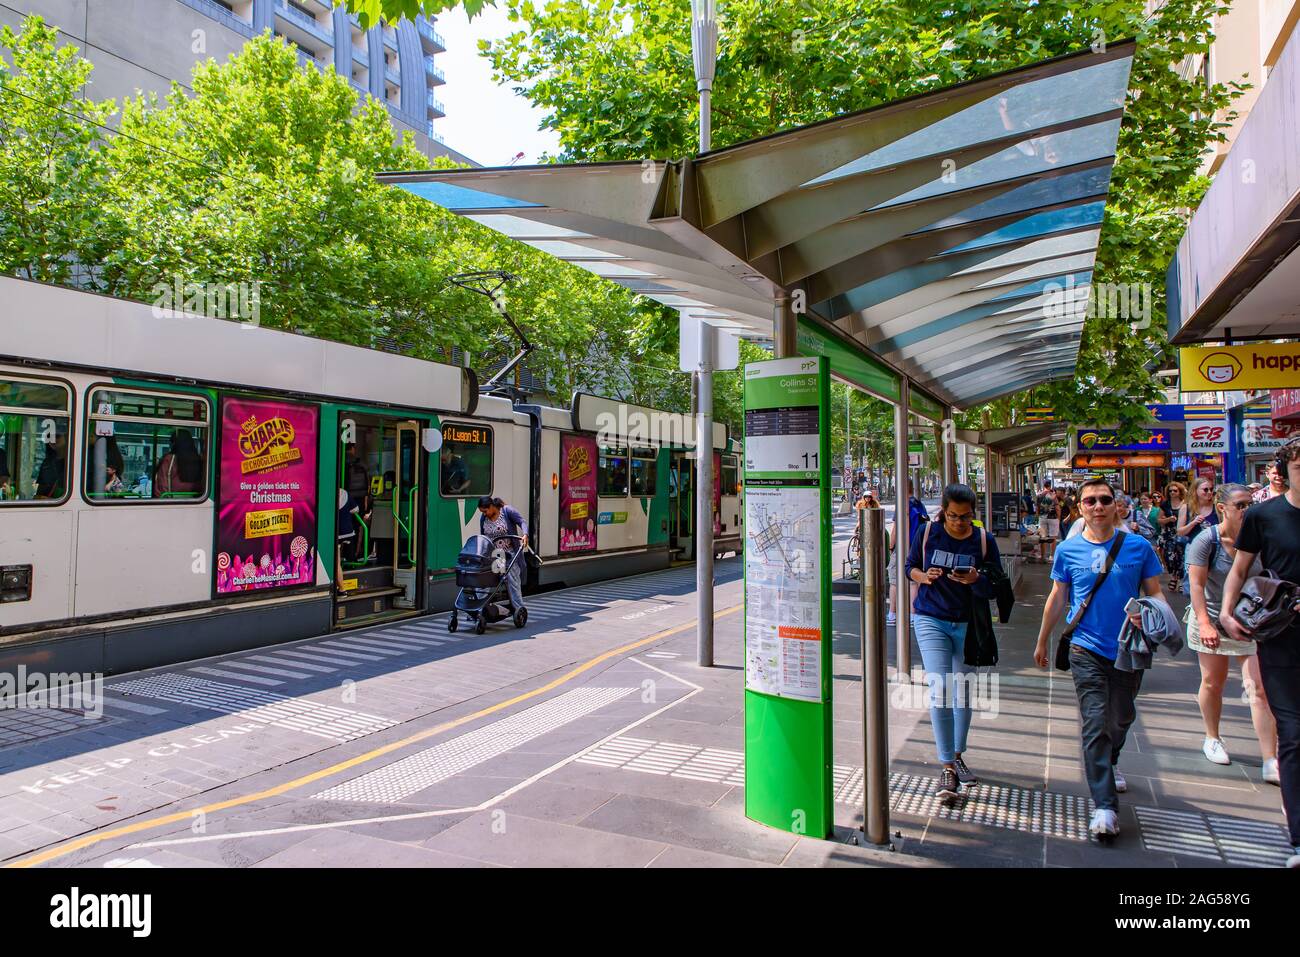 A tram stop on the street in Melbourne city center, Australia Stock Photo